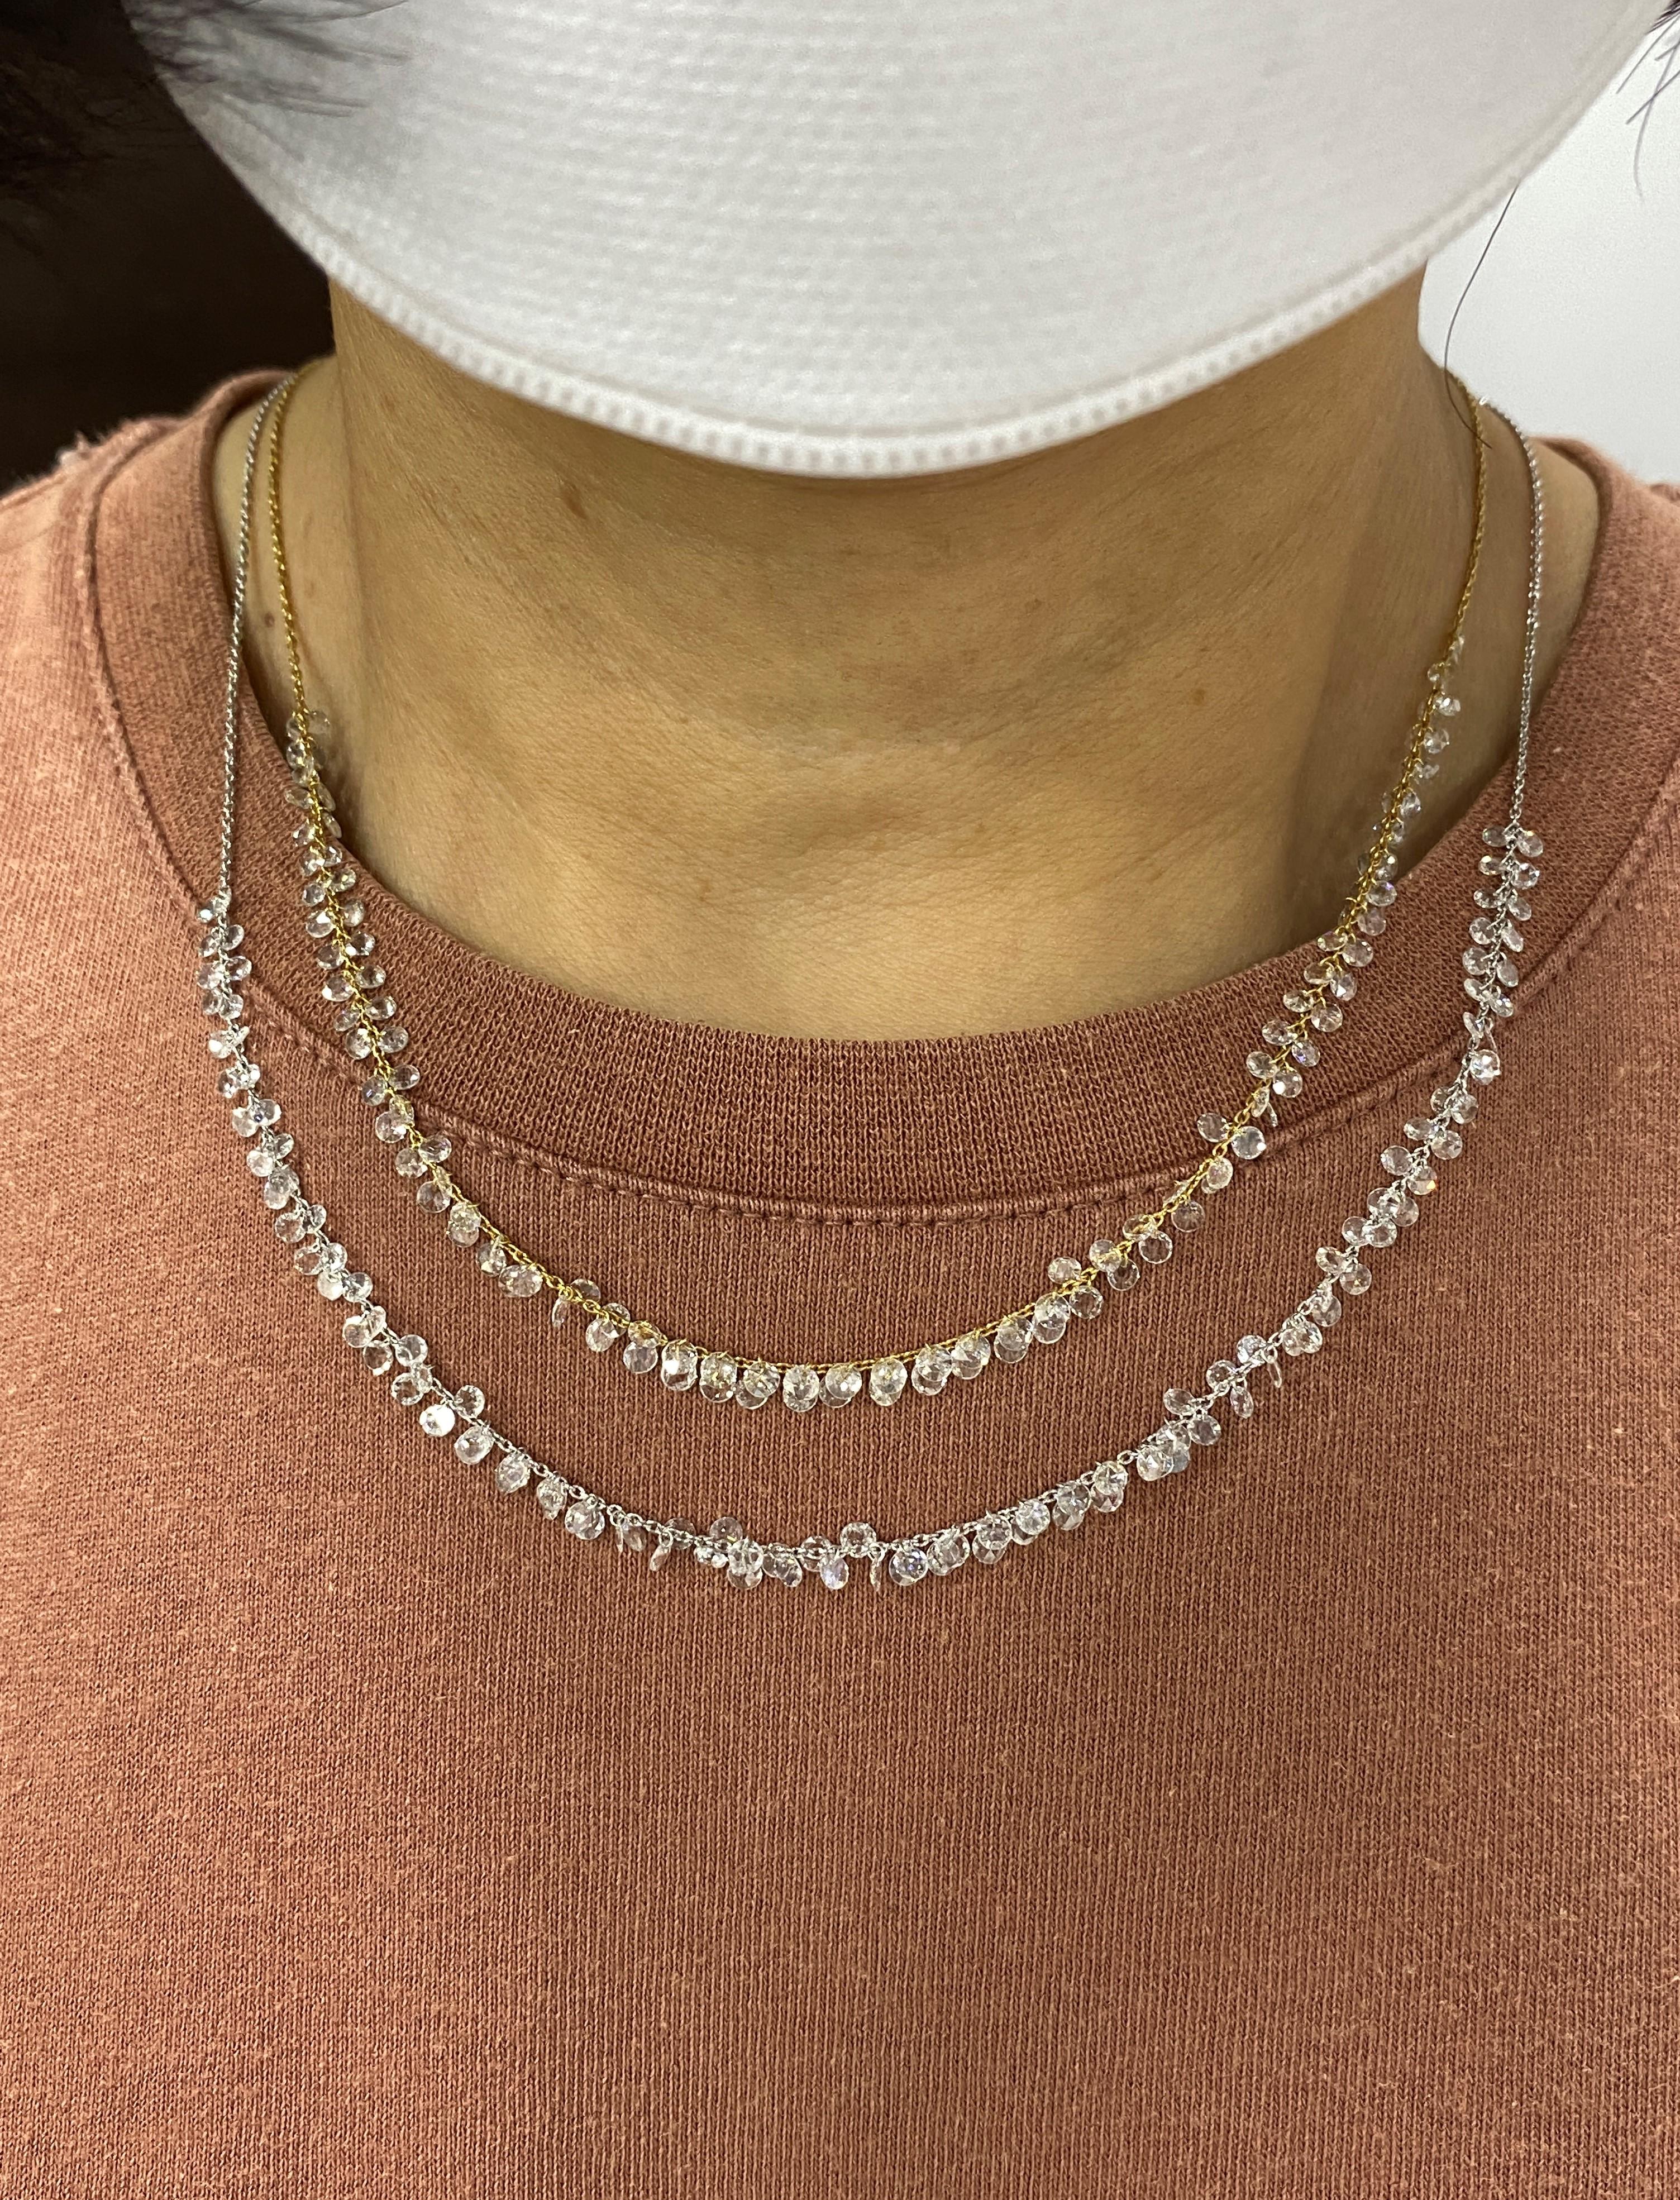 JR 3.68 Carat Rose Cut Floral Dangling Necklace 18 Karat White Gold

This contemporary piece of necklace is made of Drilled Rose cut diamond and it eludes femininity & grace. Diamond Rose Cut Floral Dangling Necklace can be adjust the length from 16